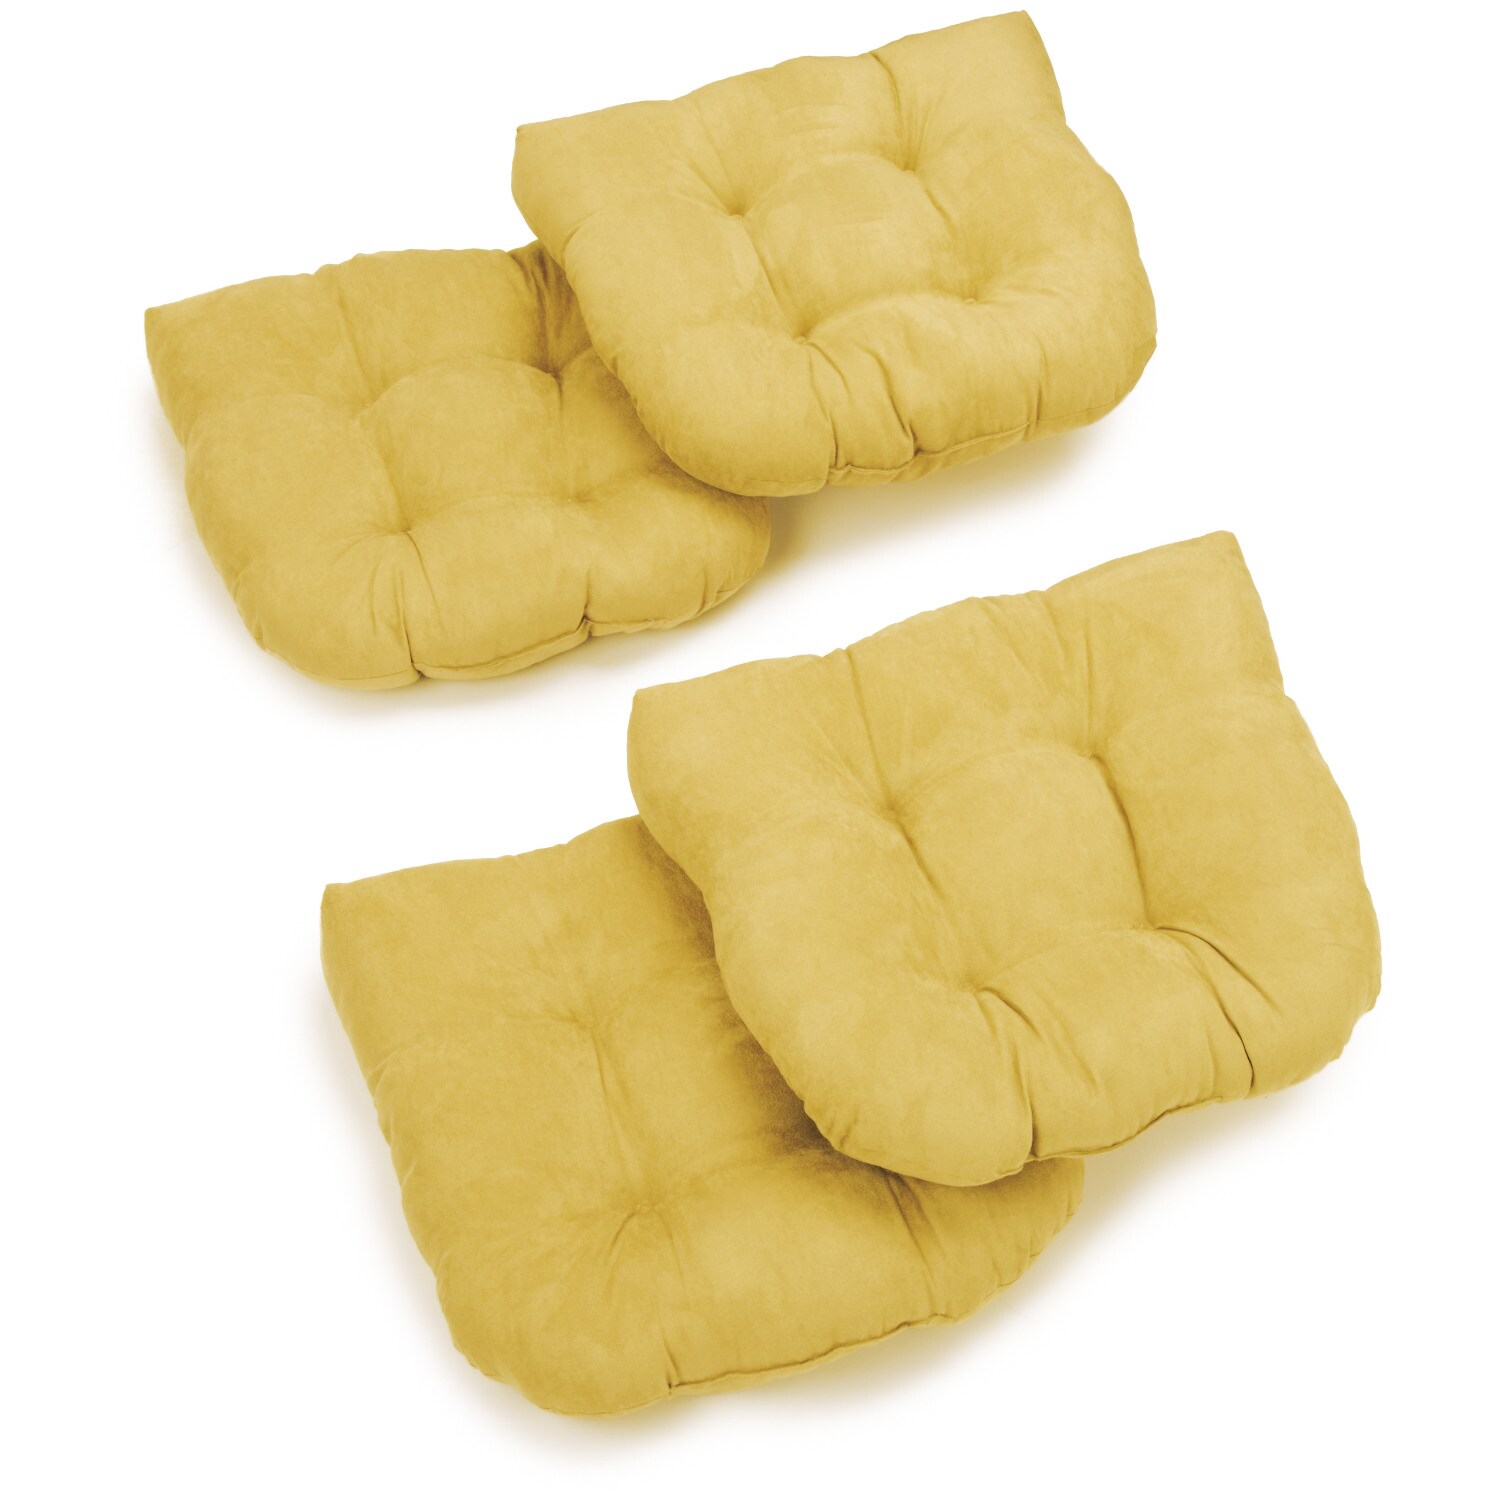 60-inch by 19-inch Tufted Solid Twill Bench Cushion Yellow-Color